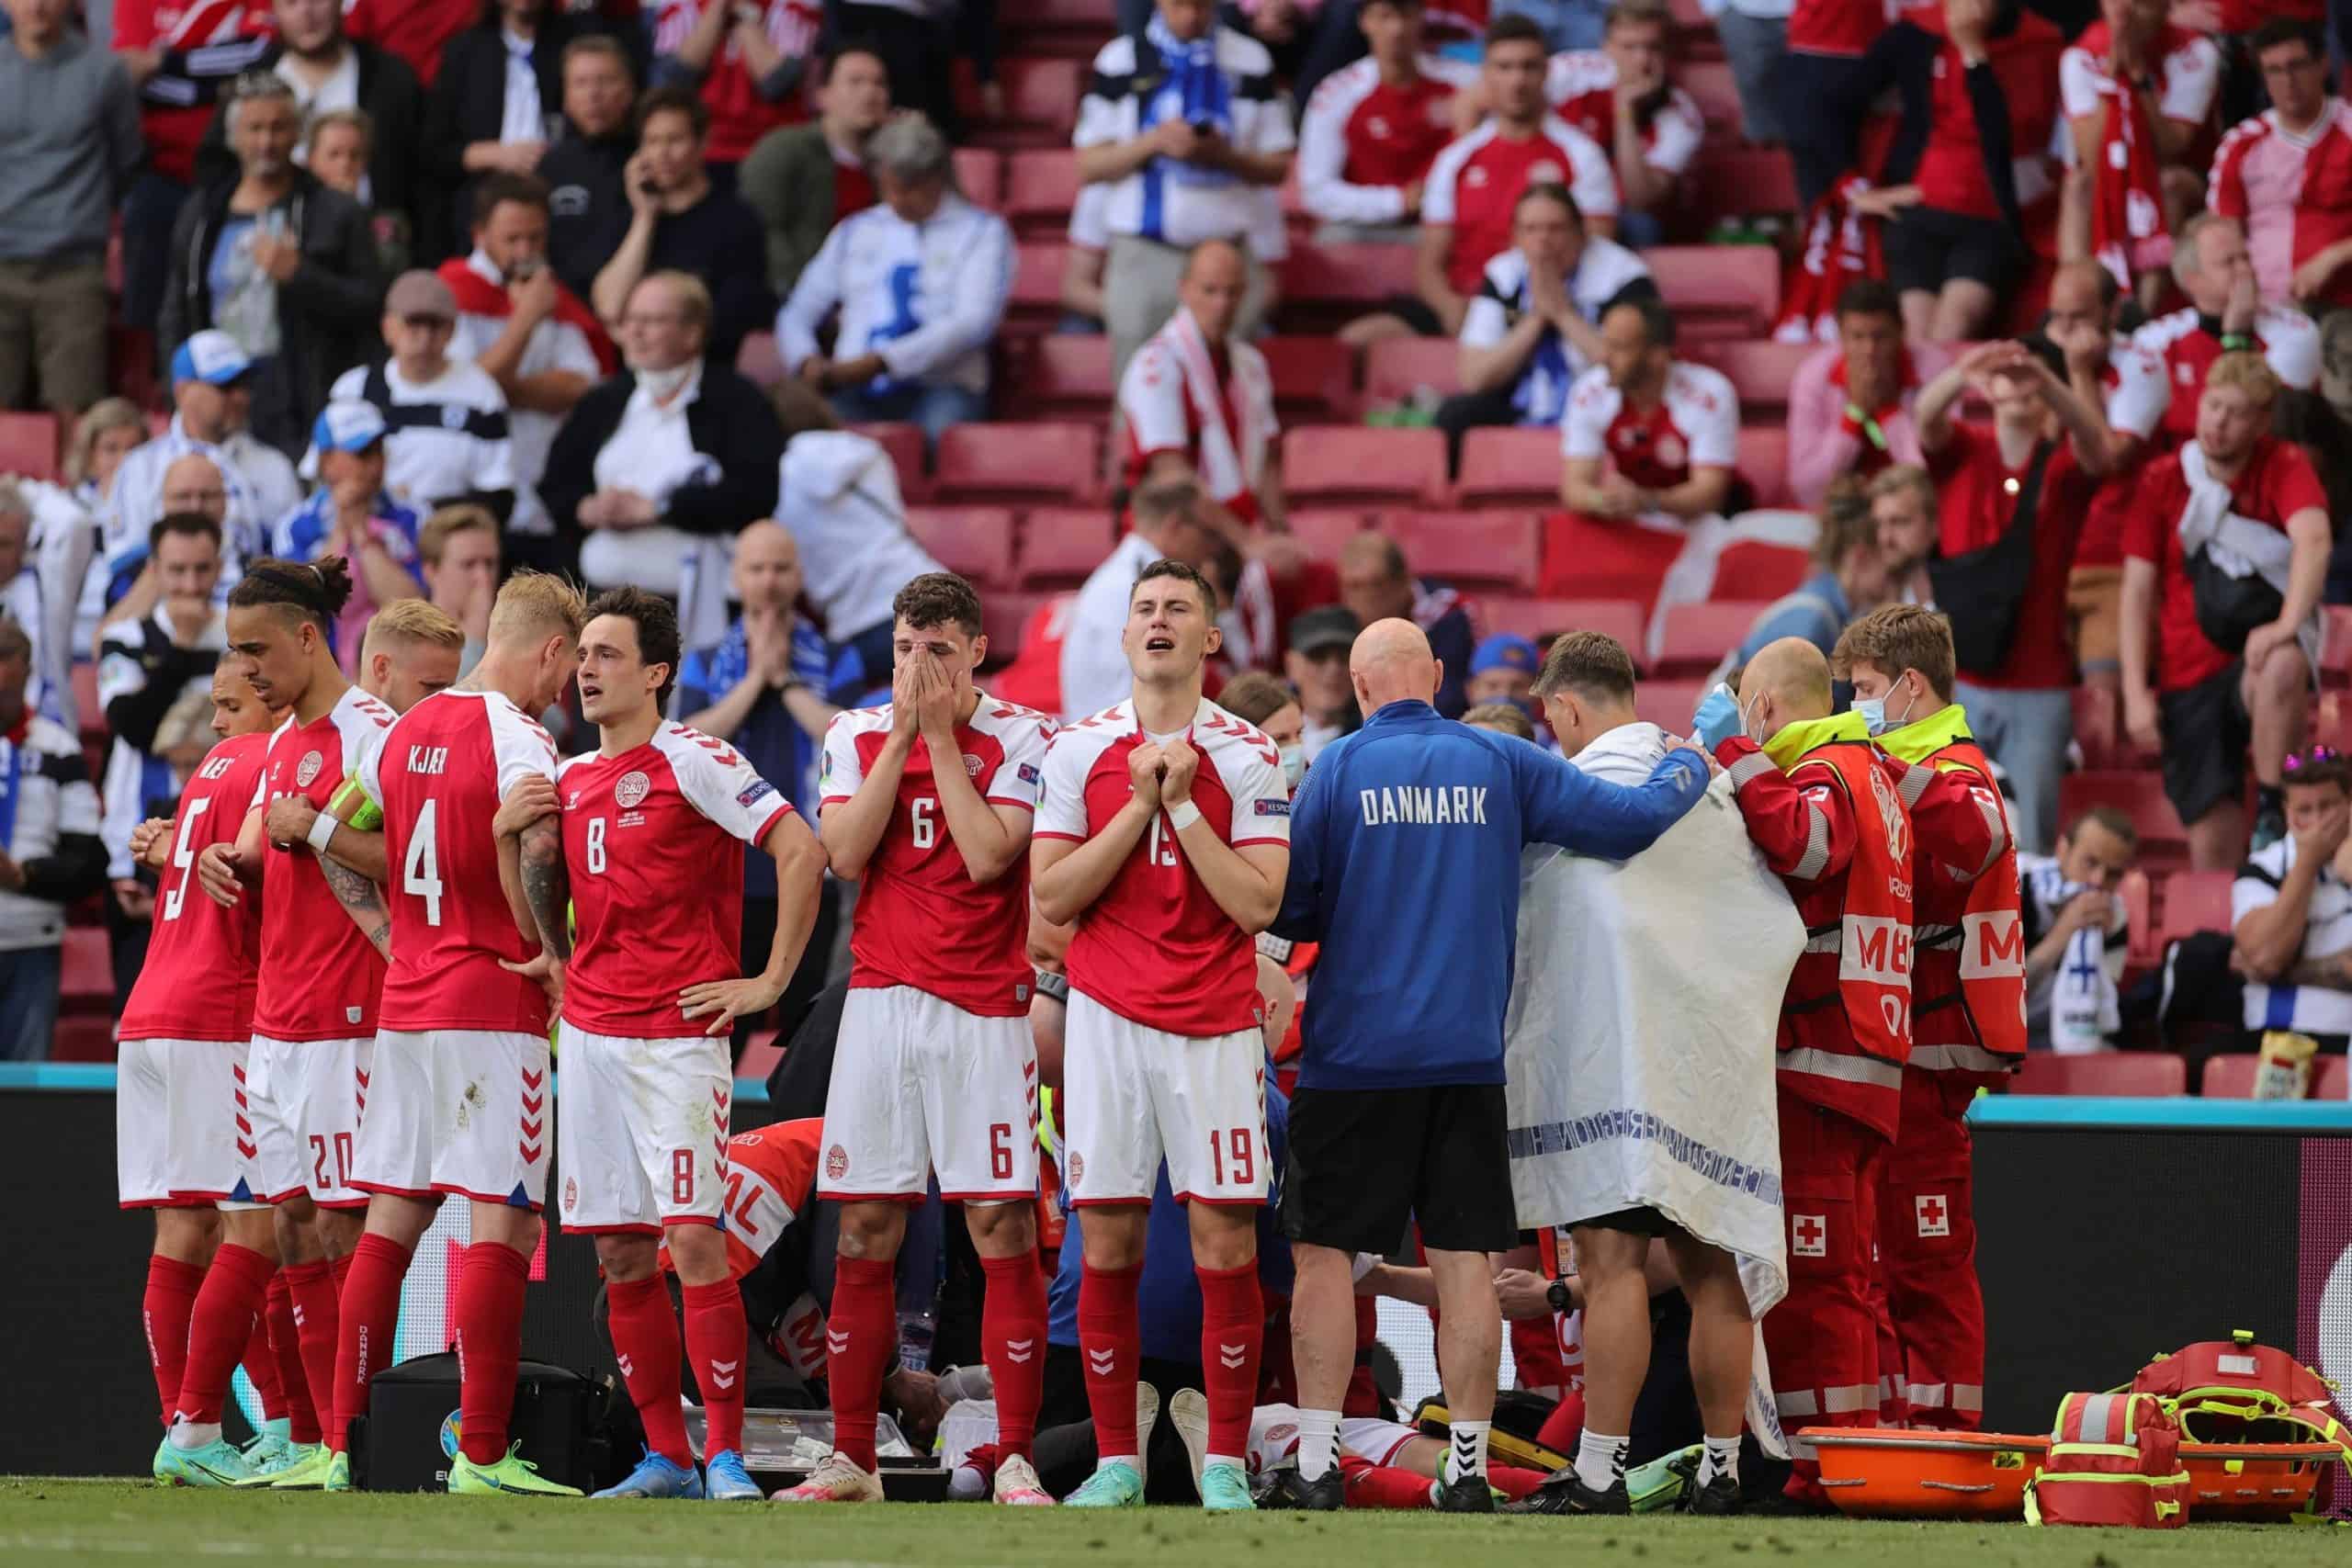 Outpouring of support for Danish players who formed a protective ring around collapsed Eriksen